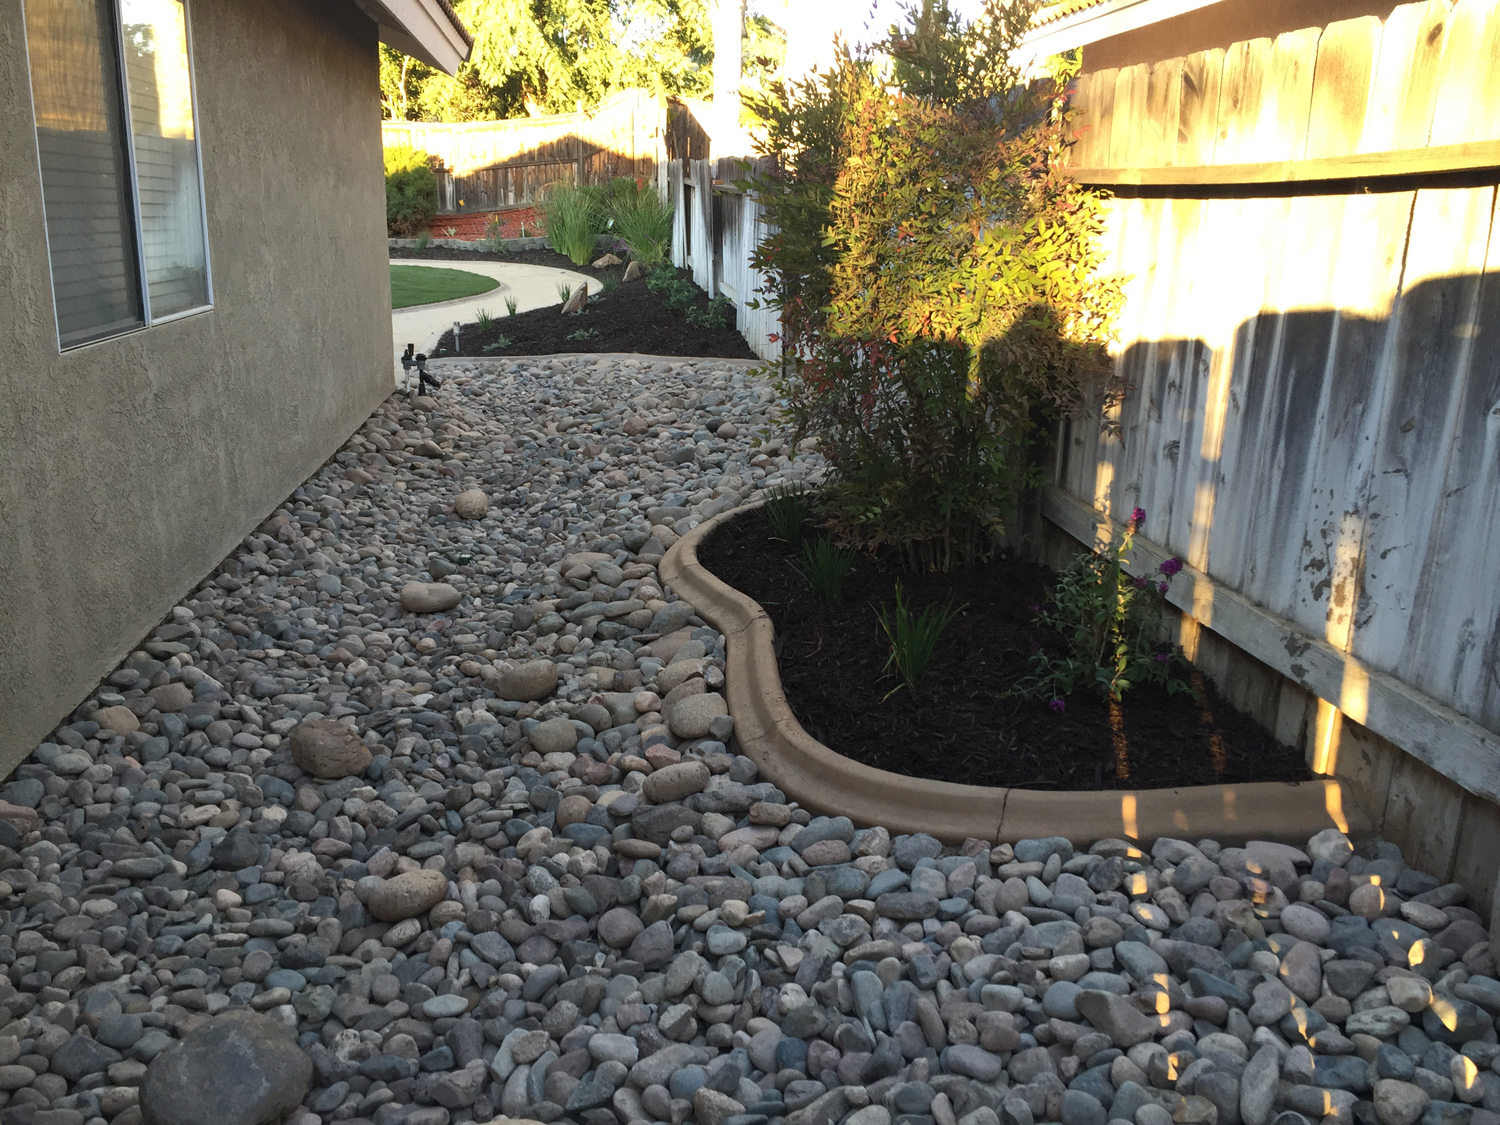 Rock bed and mulch bed on the side of the house.